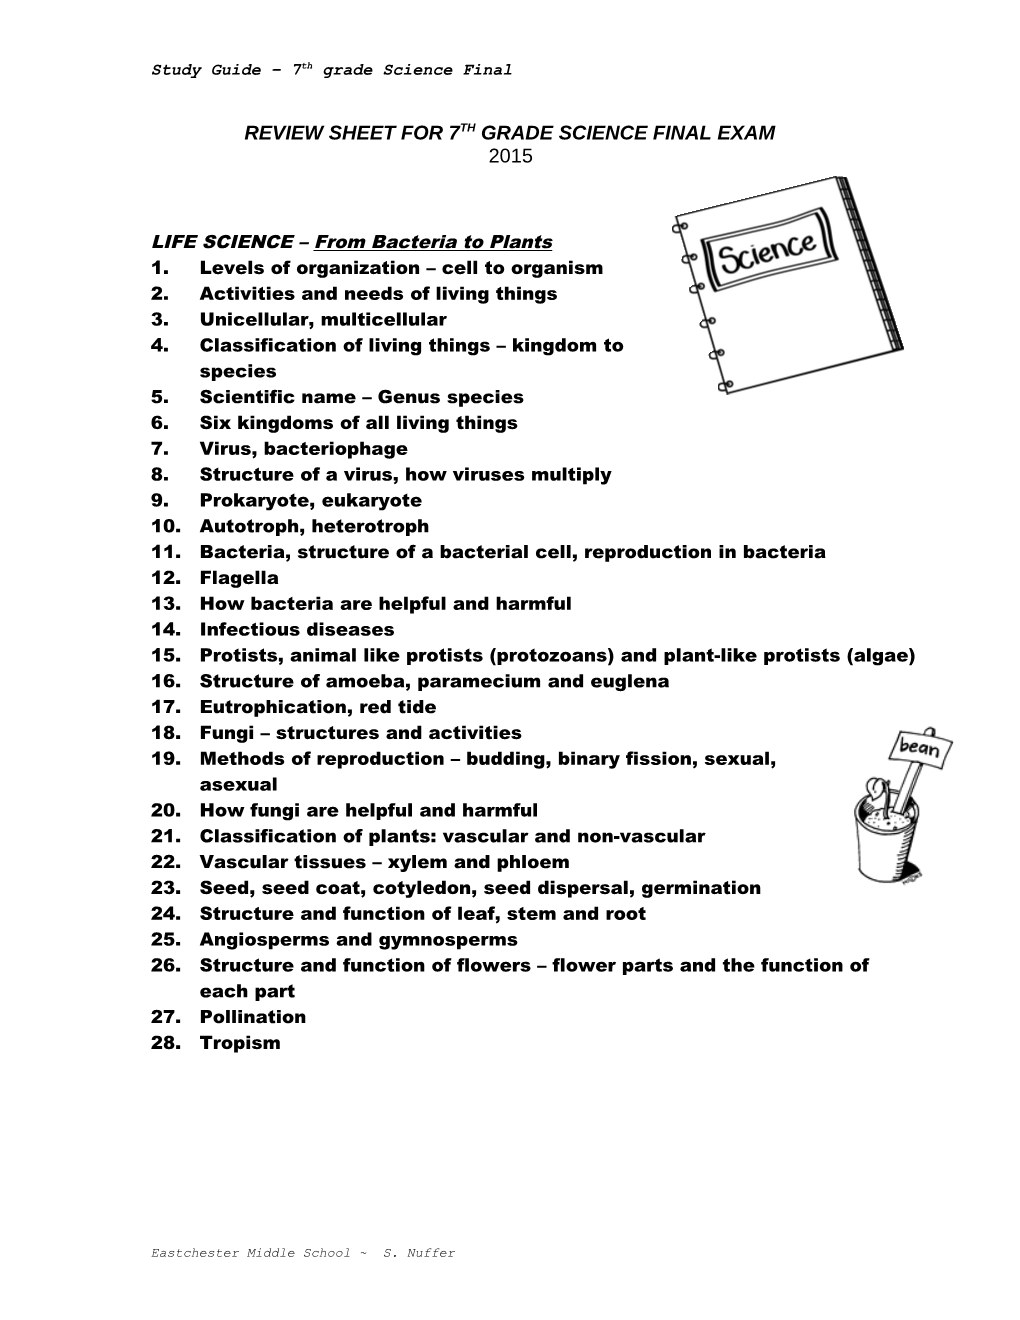 Review Sheet for 7Th Grade Science Final Exam